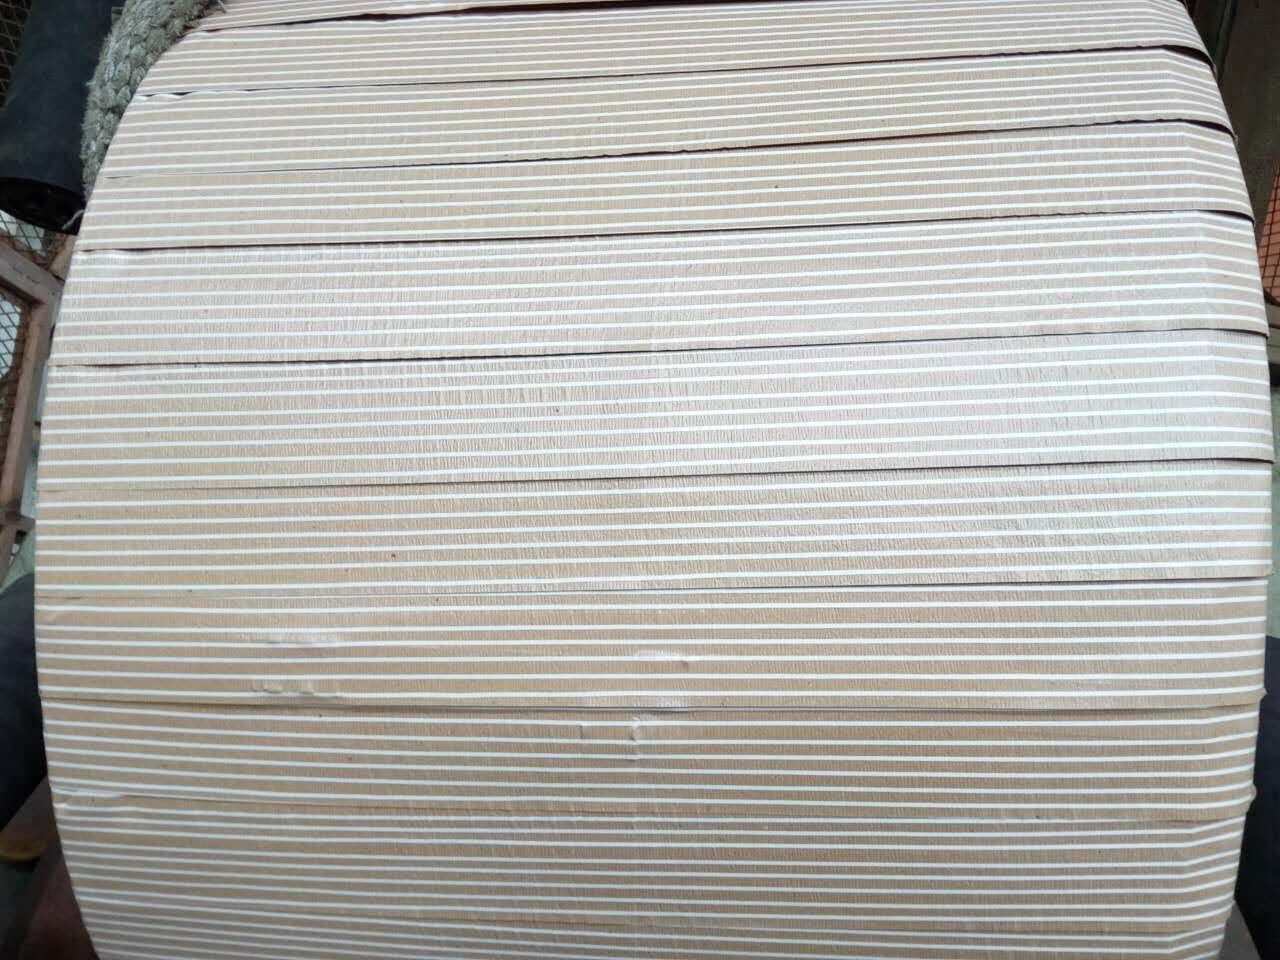 Quality PC Strand(High Strength Low Relaxation PC Strand) for bridges,highway,airport,buildings etc for sale